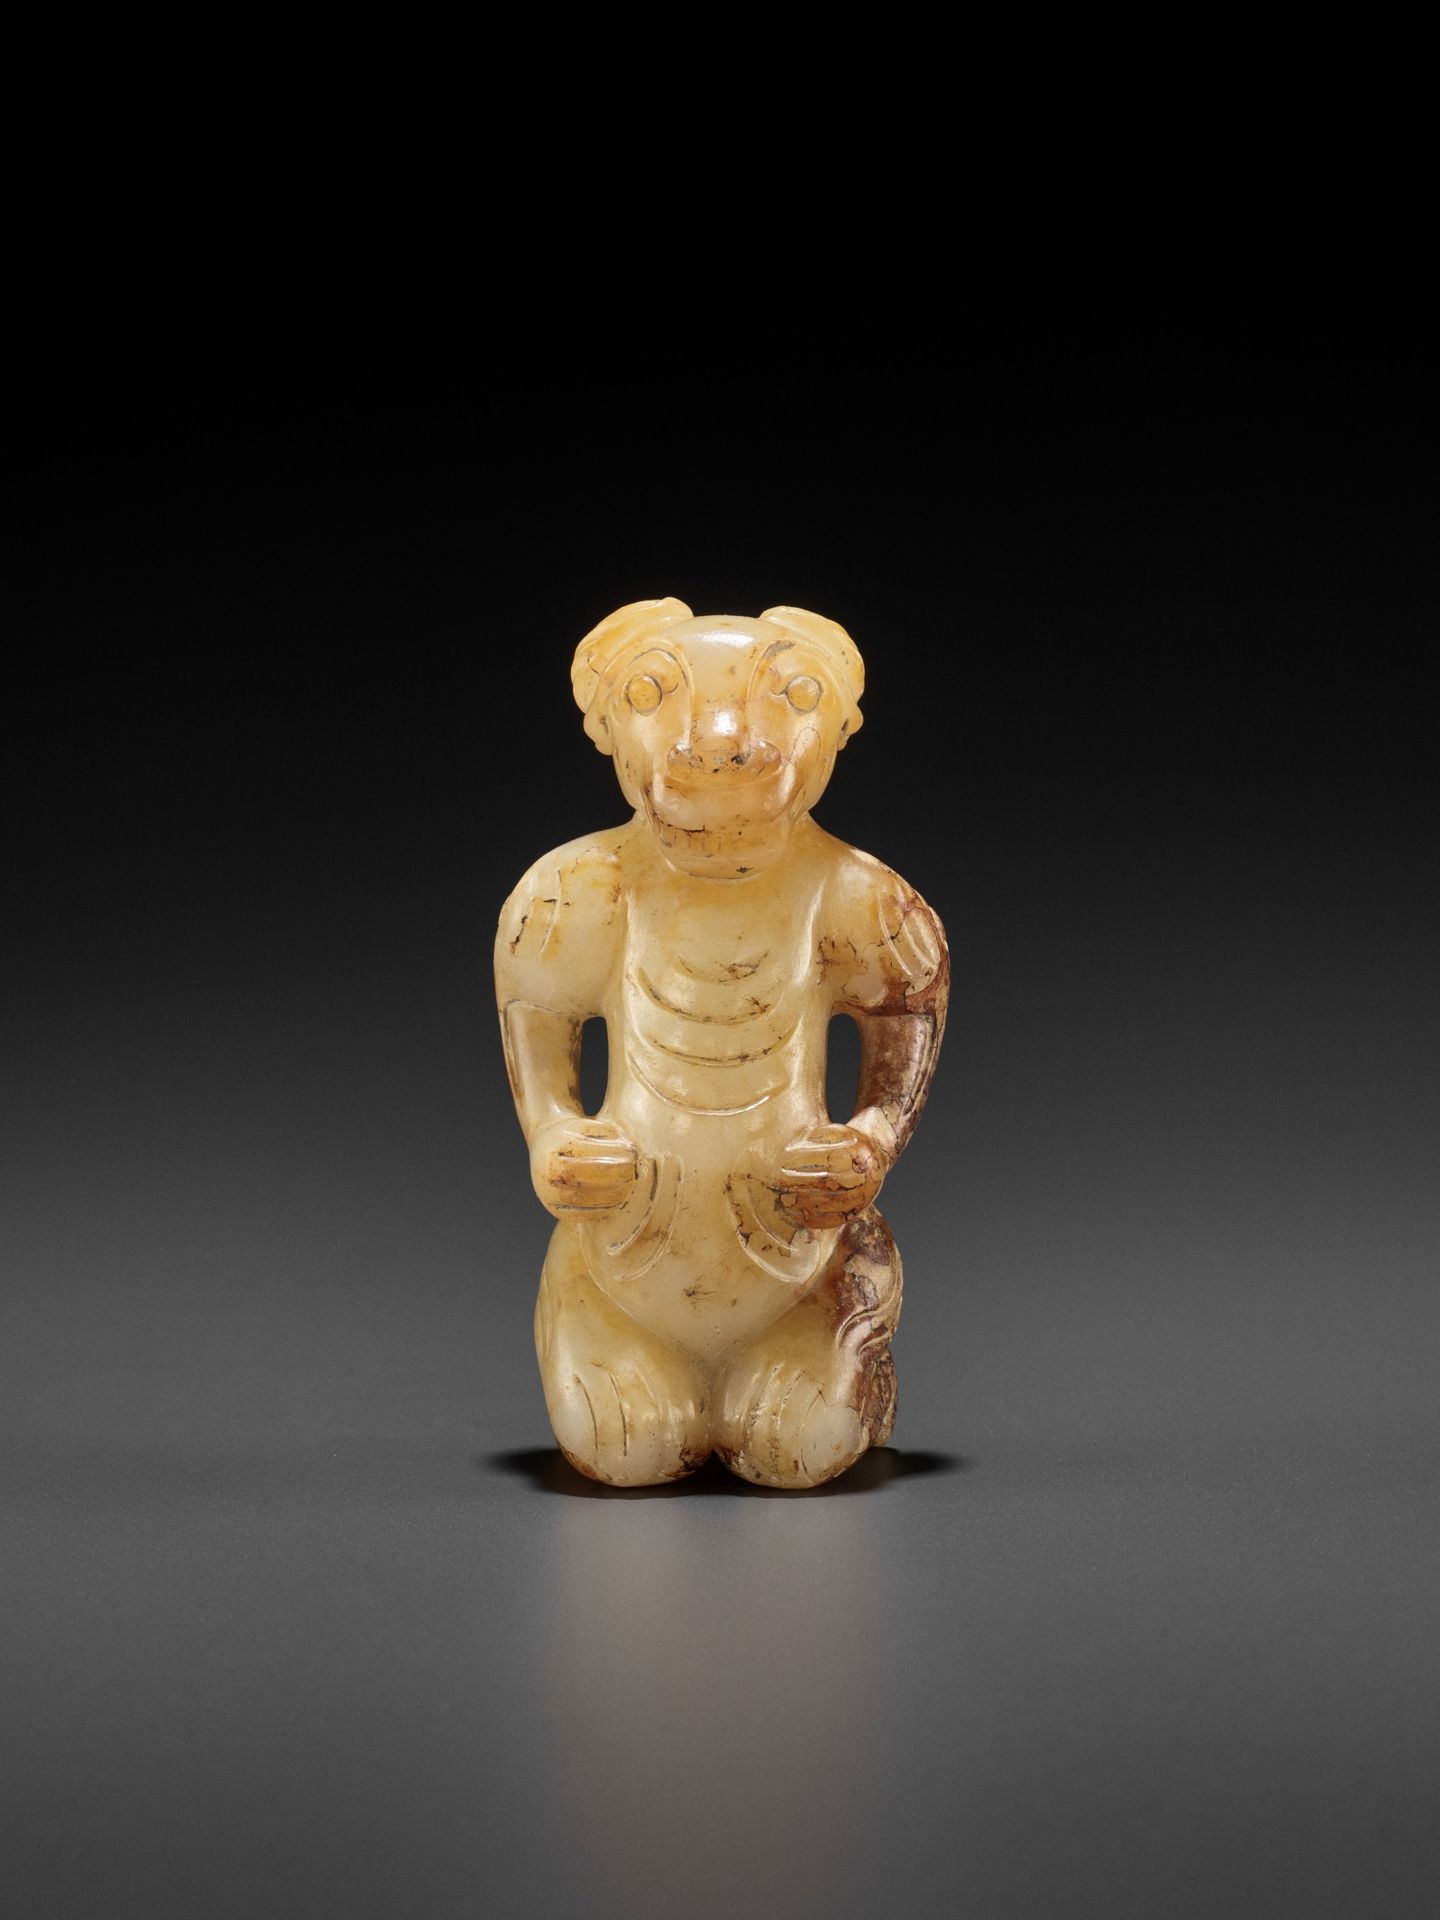 A YELLOW AND RUSSET JADE FIGURE WITH A RAM'S HEAD